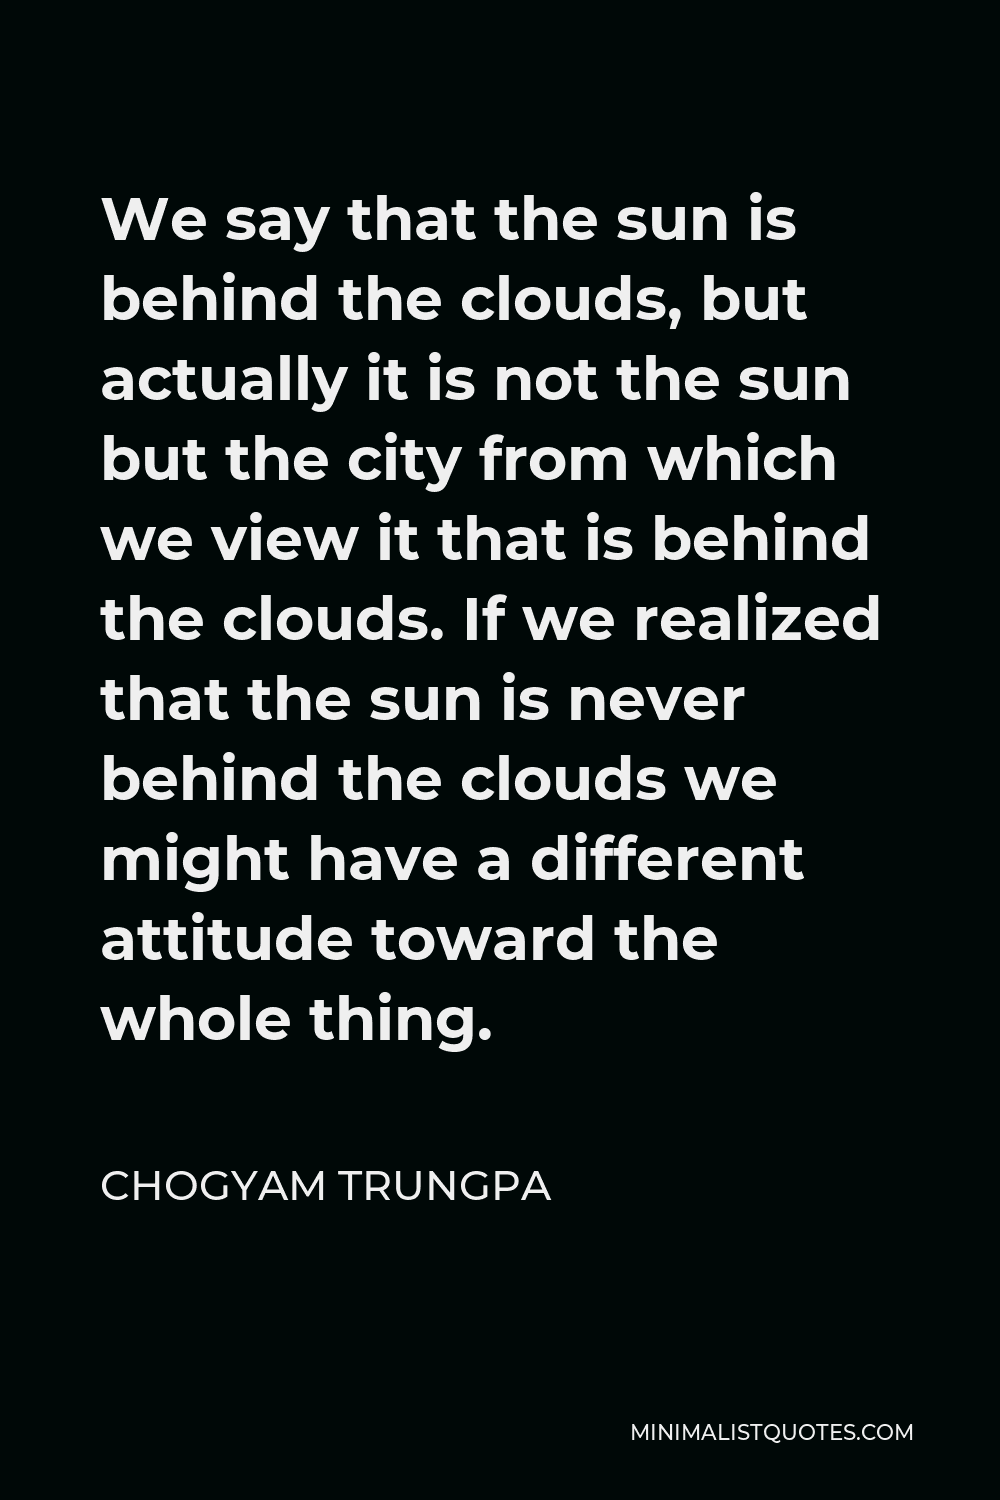 Chogyam Trungpa Quote - We say that the sun is behind the clouds, but actually it is not the sun but the city from which we view it that is behind the clouds. If we realized that the sun is never behind the clouds we might have a different attitude toward the whole thing.